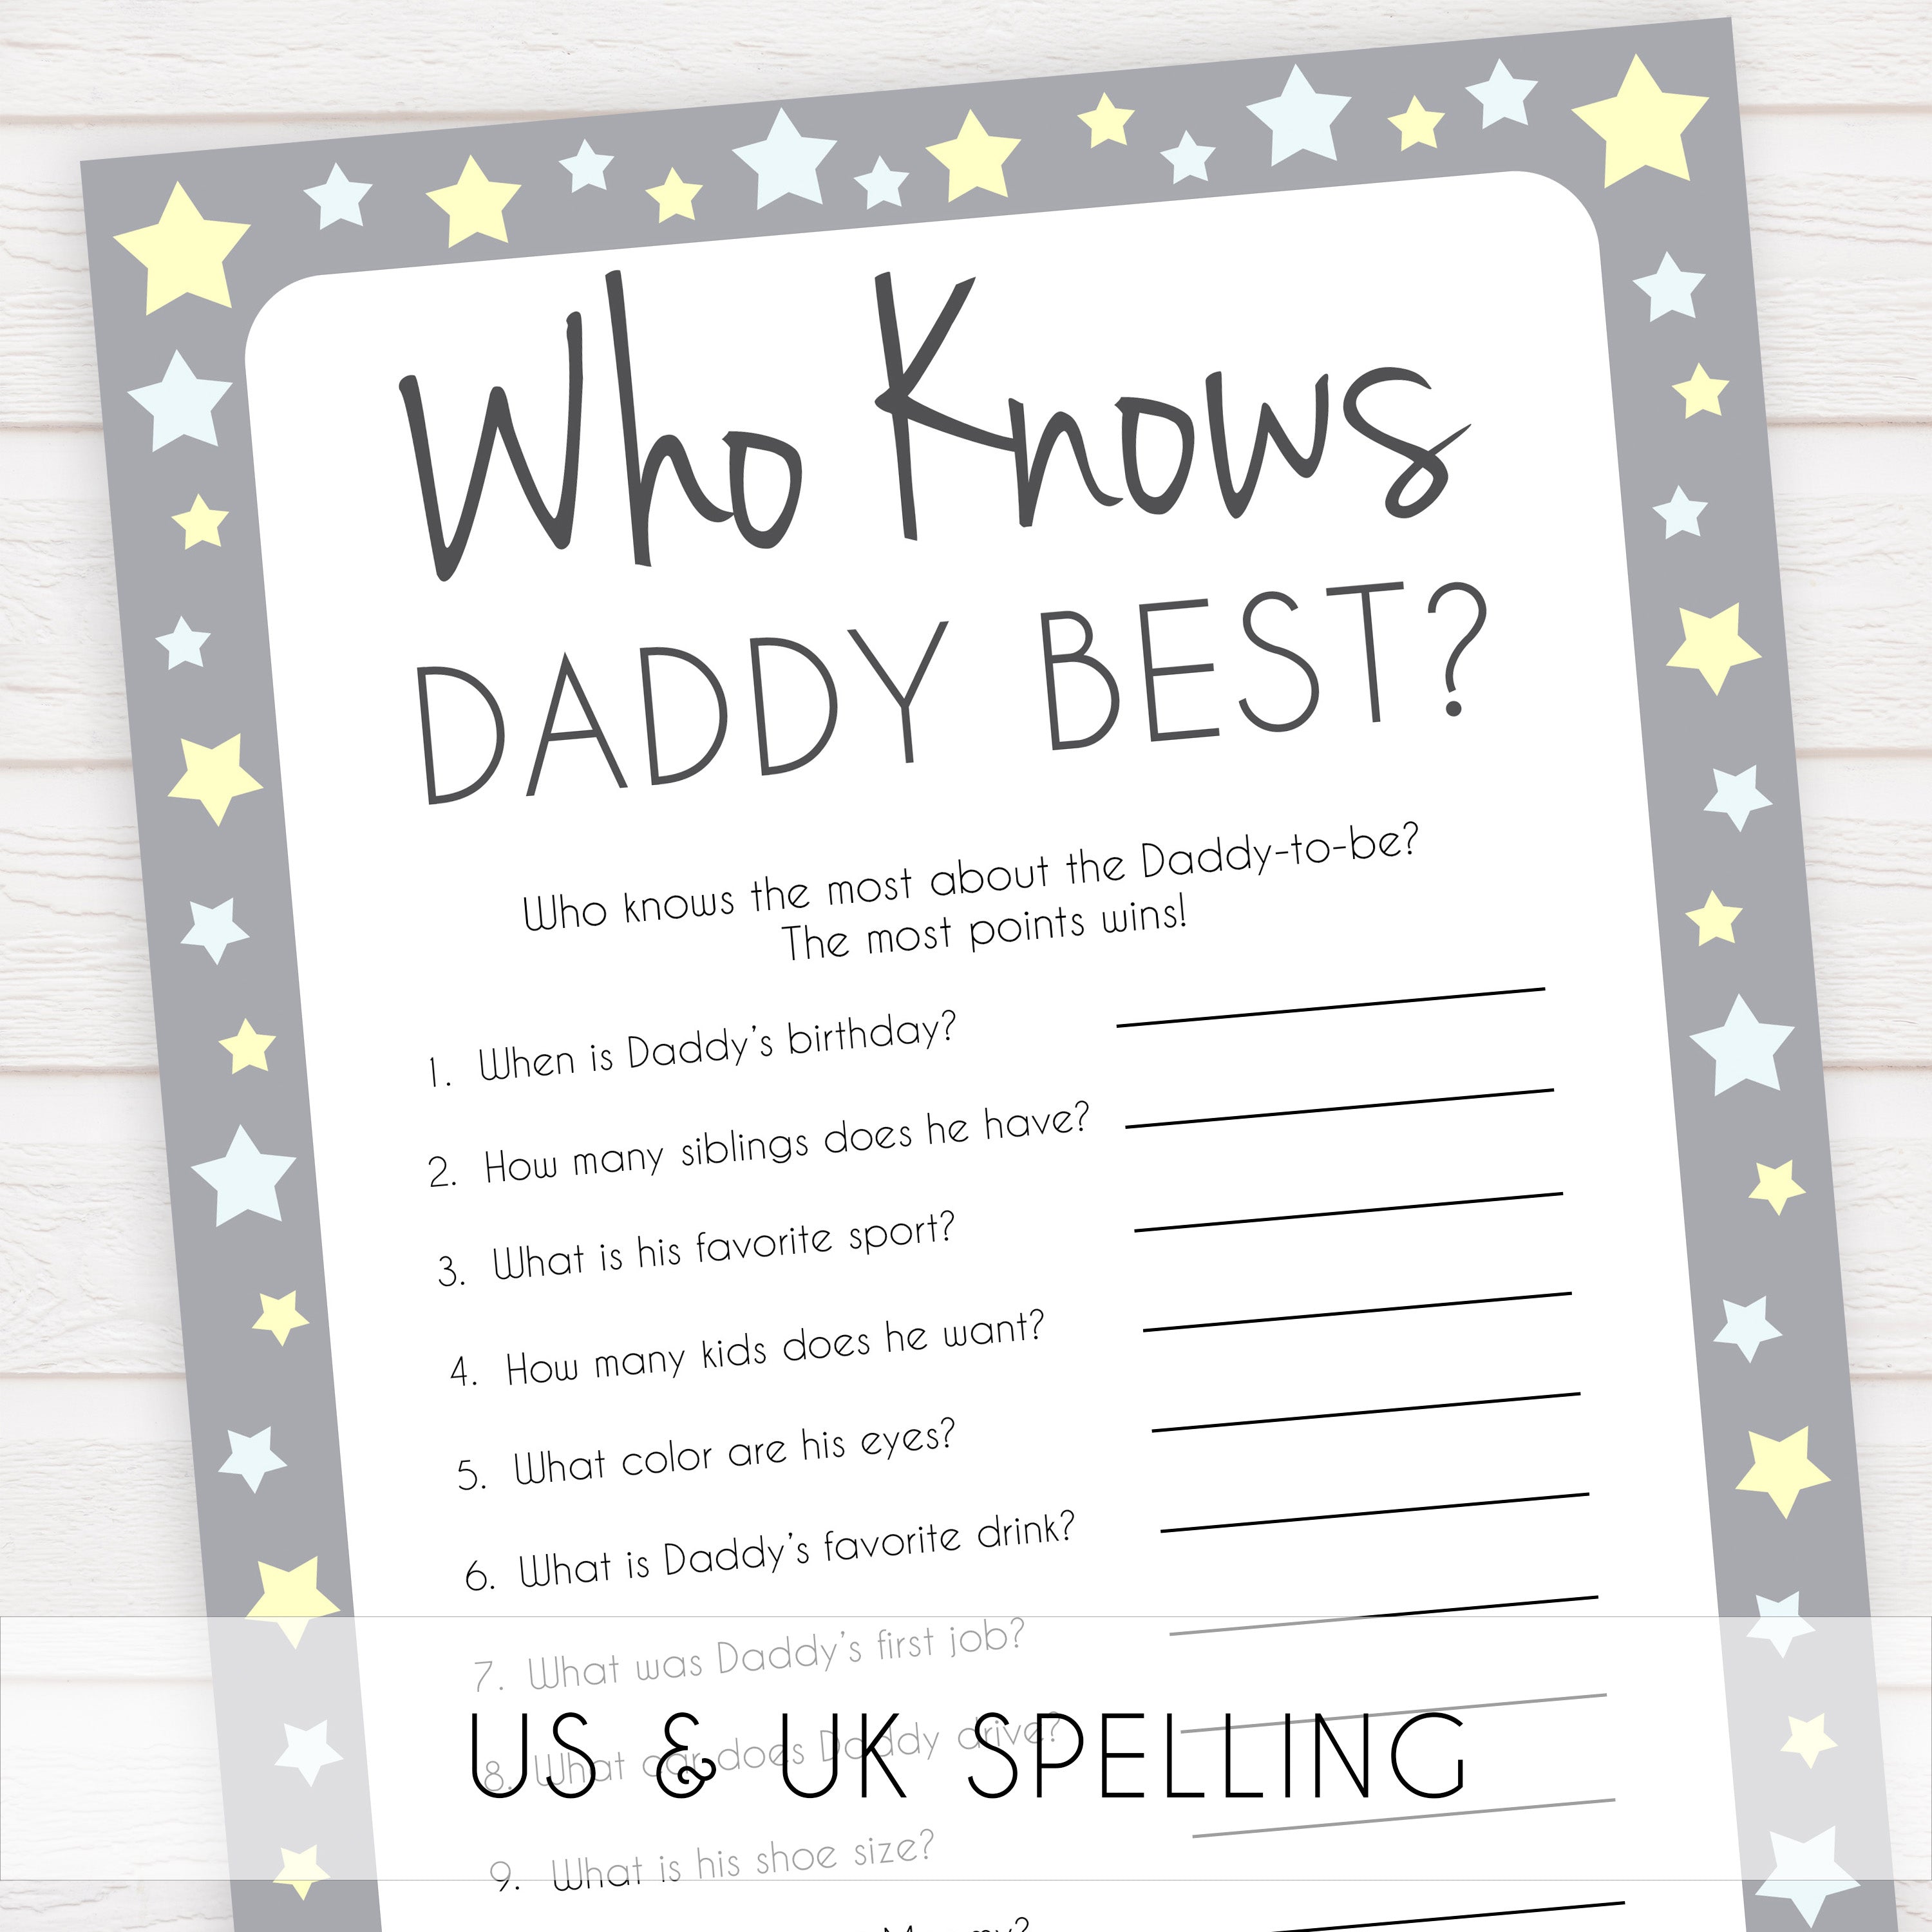 Grey Yellow Stars Who Knows Daddy Best, How Well Do you Know Daddy Games, Who Knows Daddy Game, Printable Baby Shower Games, Baby Shower, fun baby shower games, popular baby shower games